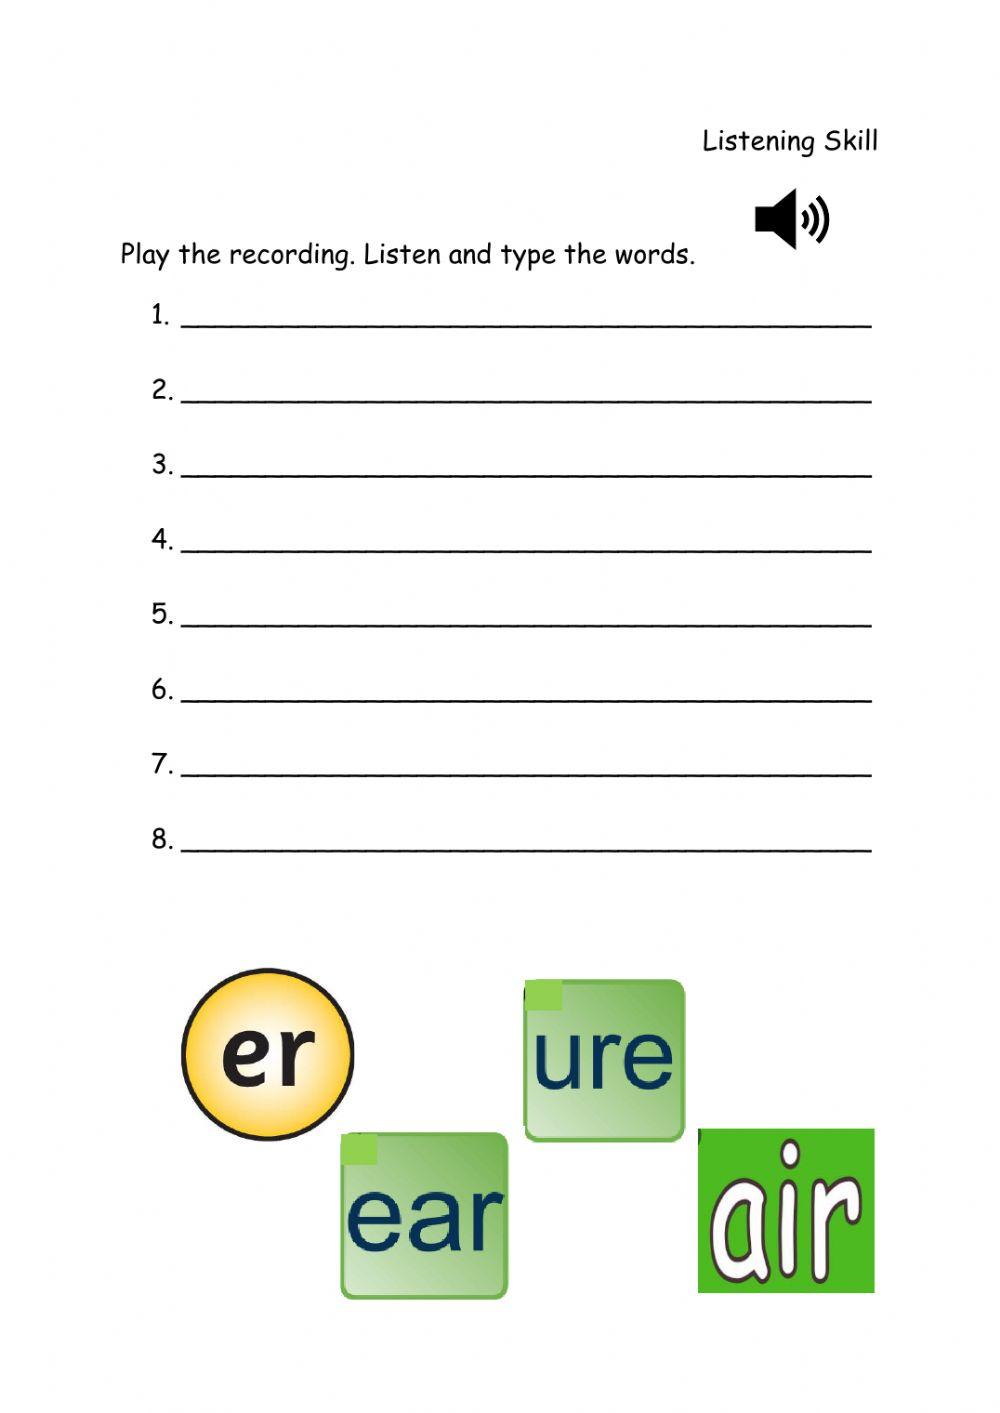 Phonics-Sounds 'ear', 'air', 'ure' and 'er'